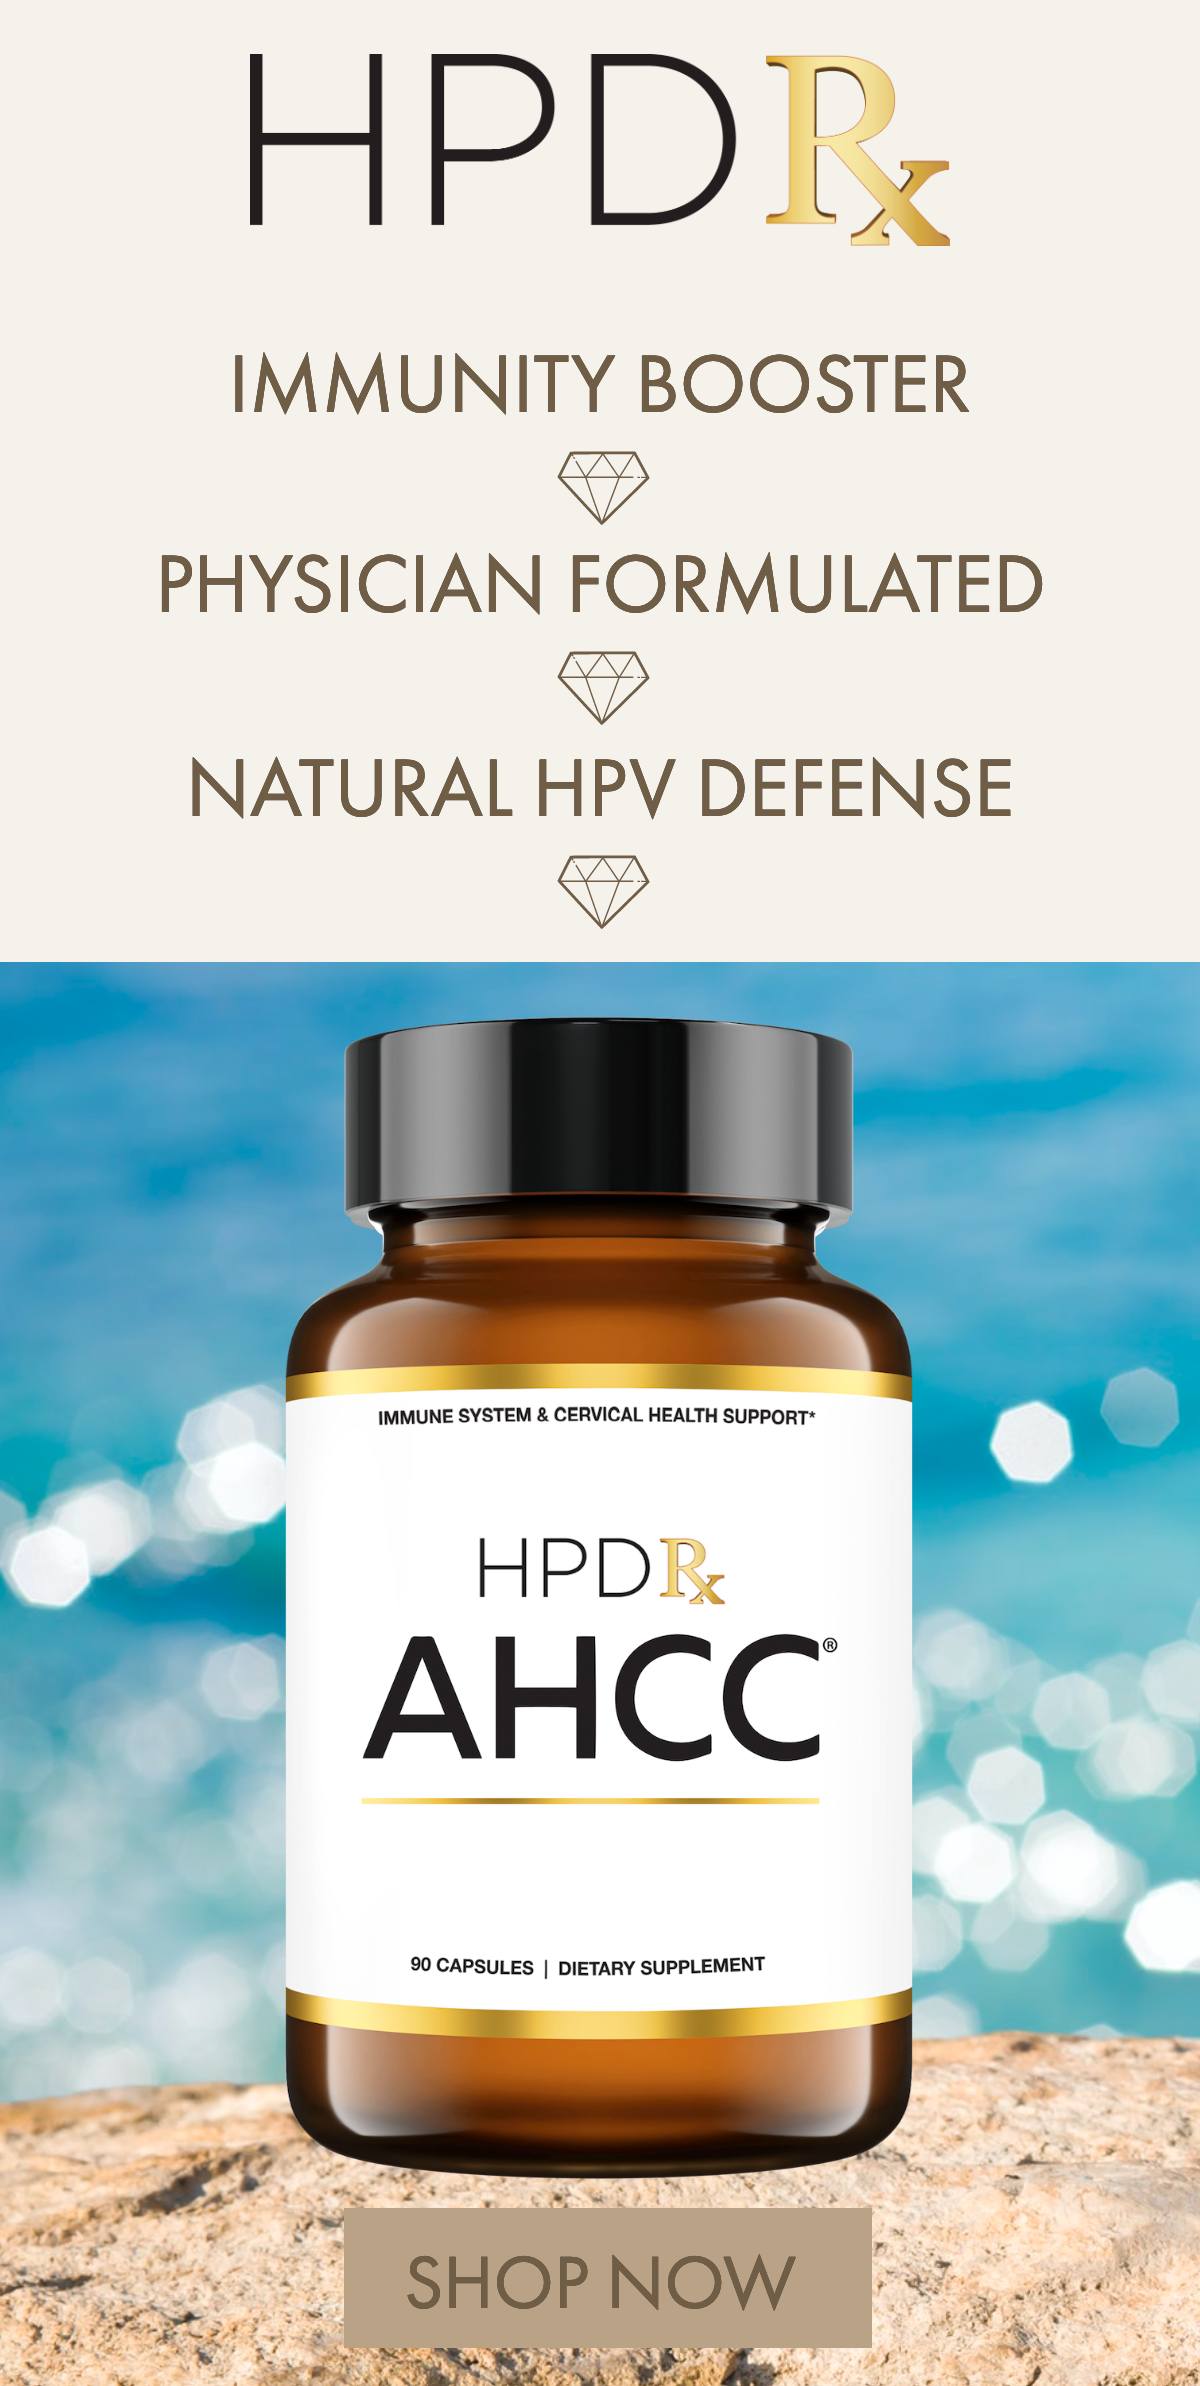 HPDRx - Immunity Booster, Physician Formulated, Natural HPV Defense